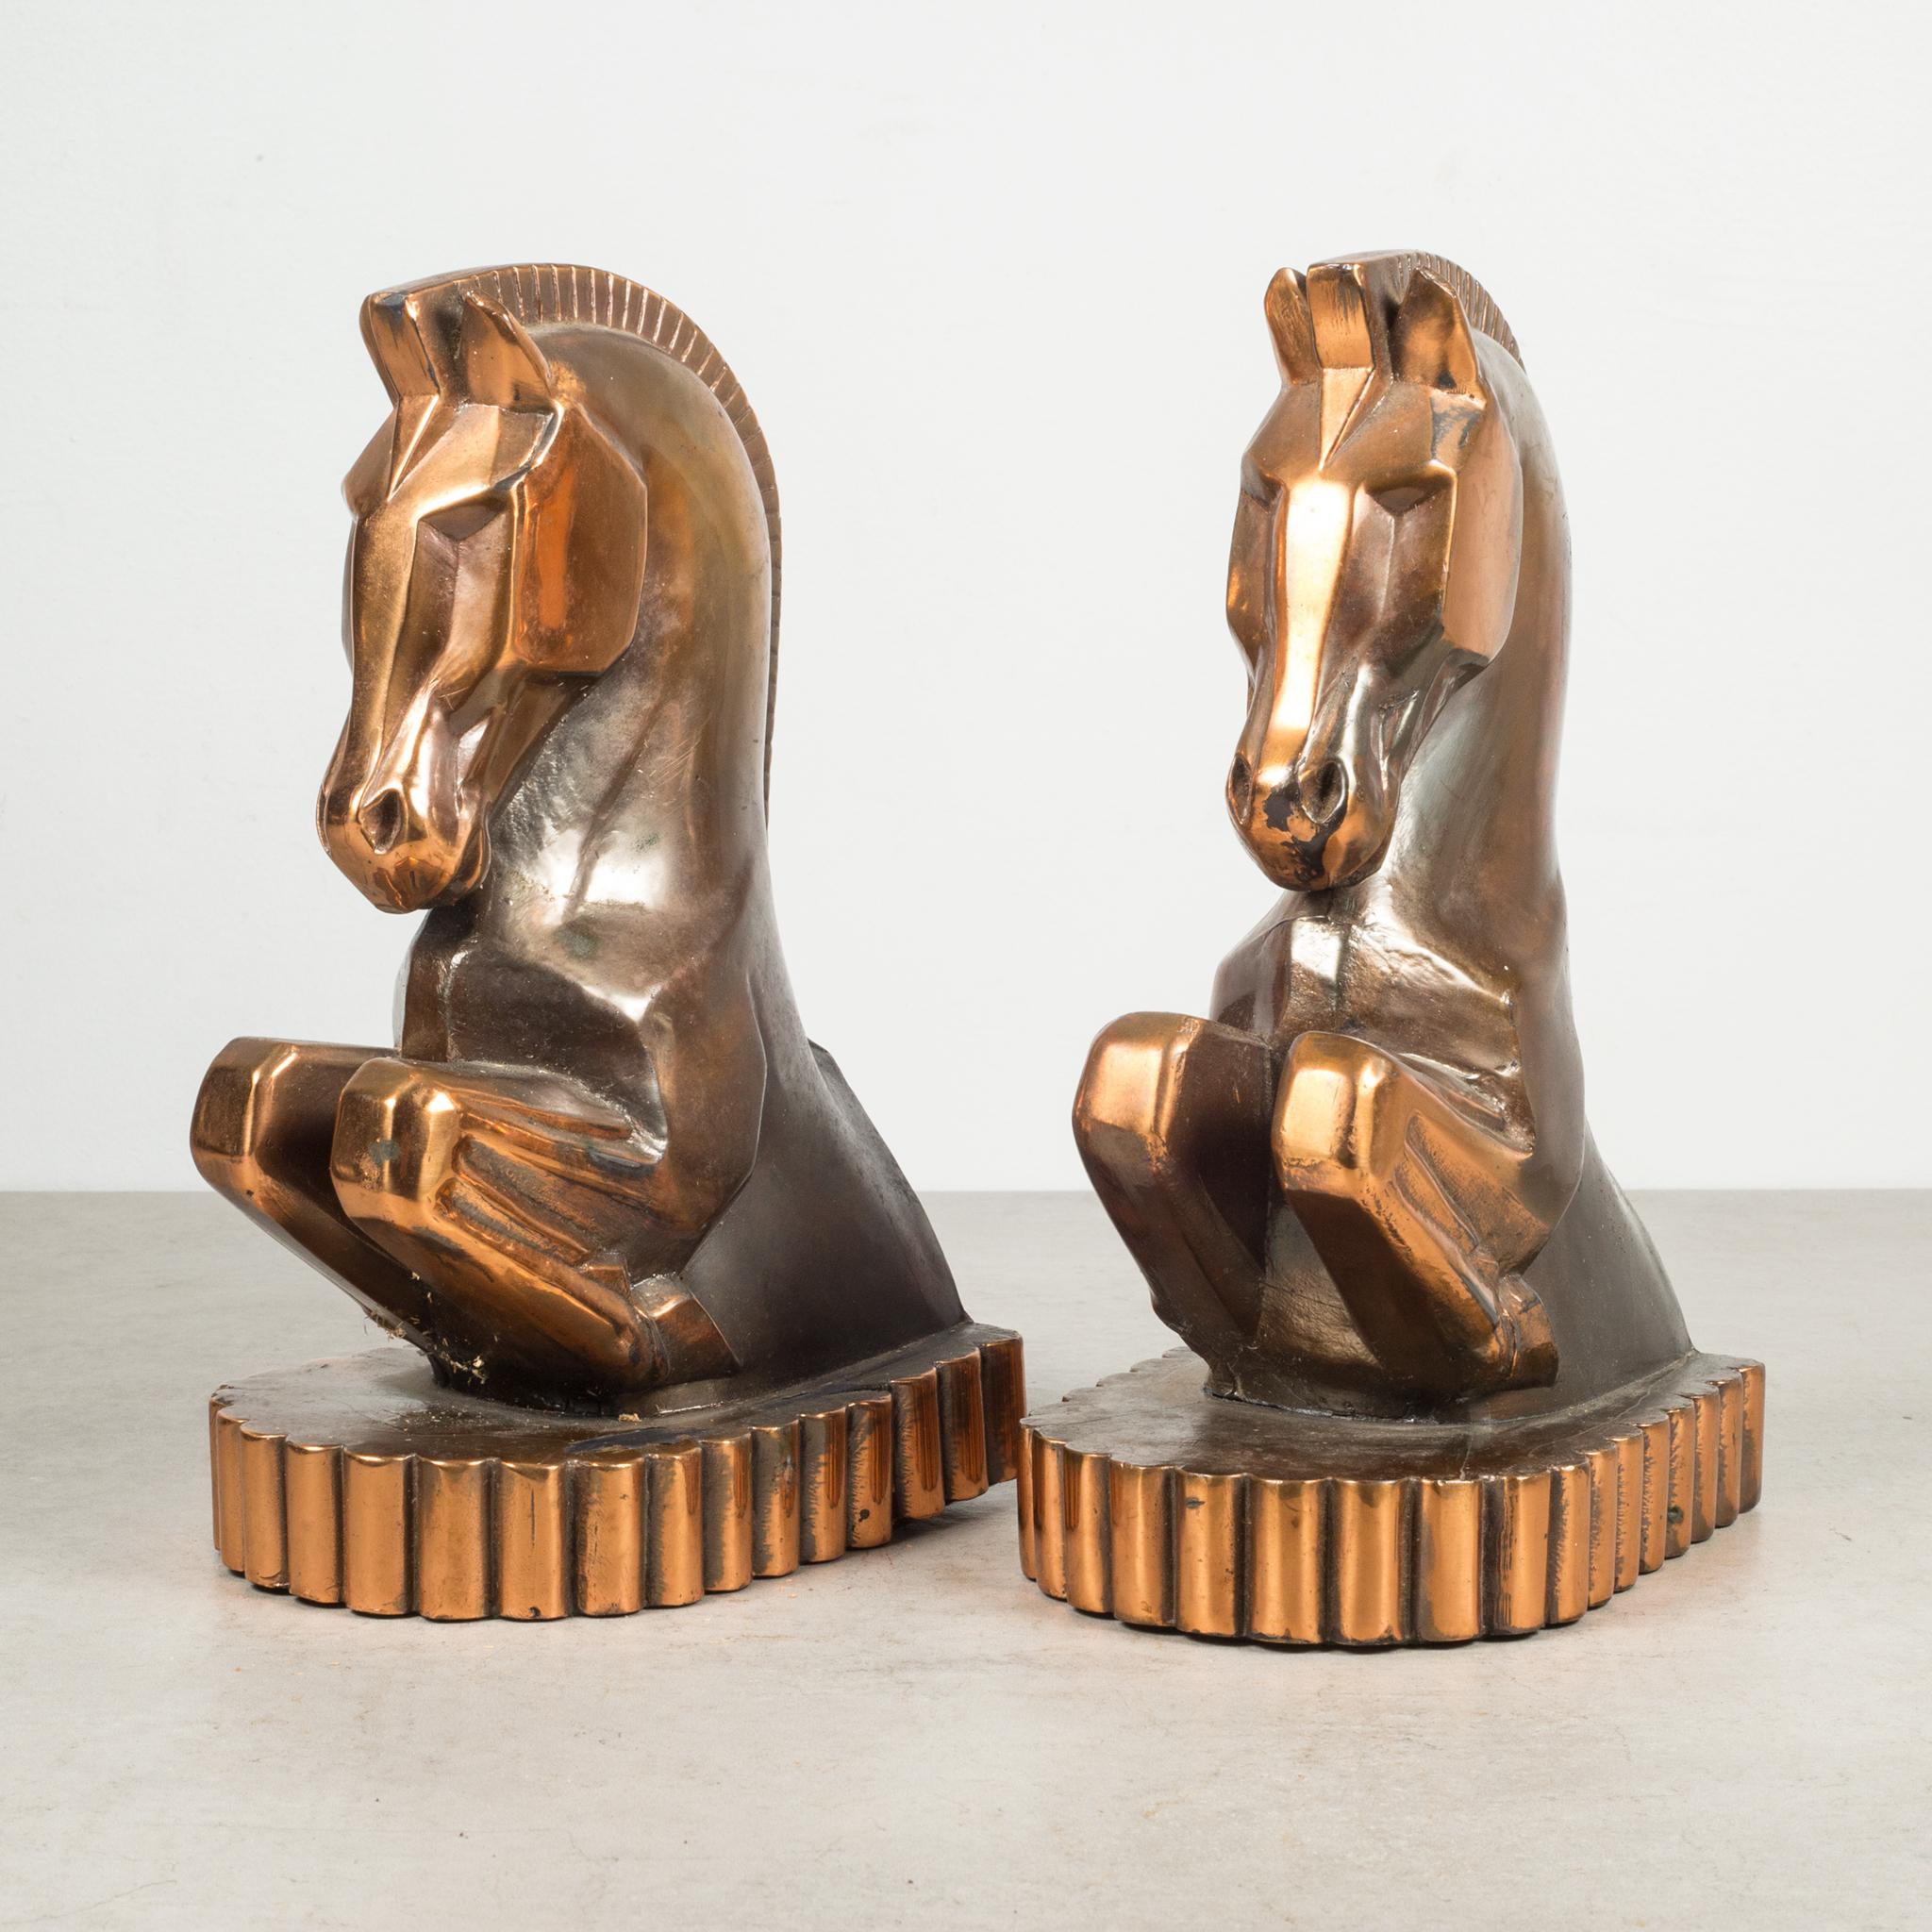 About

An extremely large pair of Art Deco bronze and copper-plated Trojan horse bookends. Designed and signed by Phillip DiNapoli for Champion Products. Original felt on the bottom.

See last photo to compare size with similar bookends.

 Creator: